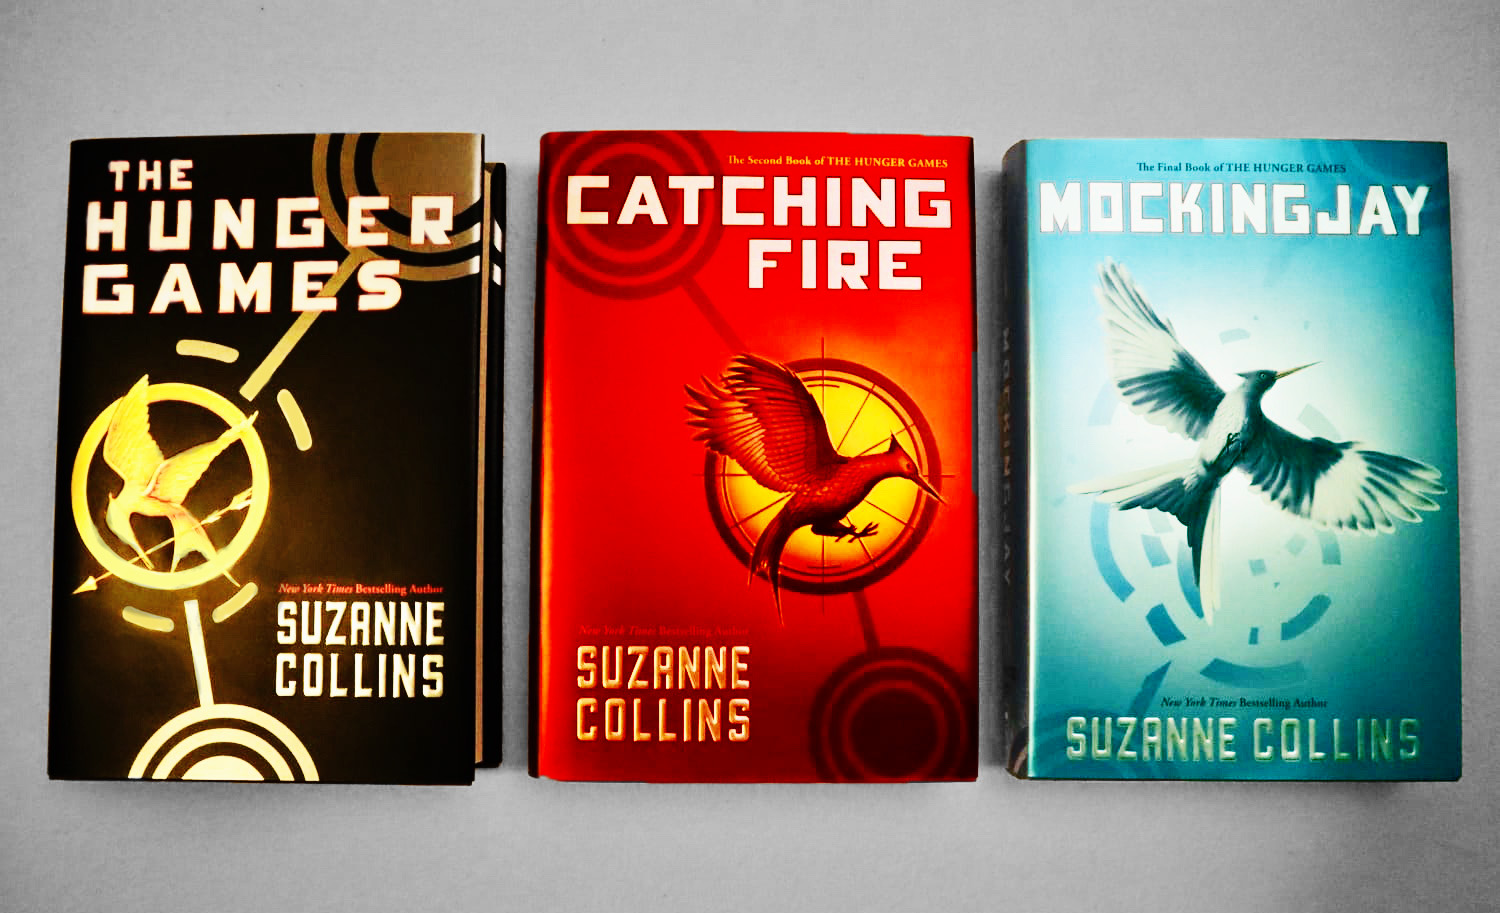 Author Suzanne Collins announced the new Hunger Games prequel, The Ballad of Songbirds and Snakes. This all happened ten years after the last book.